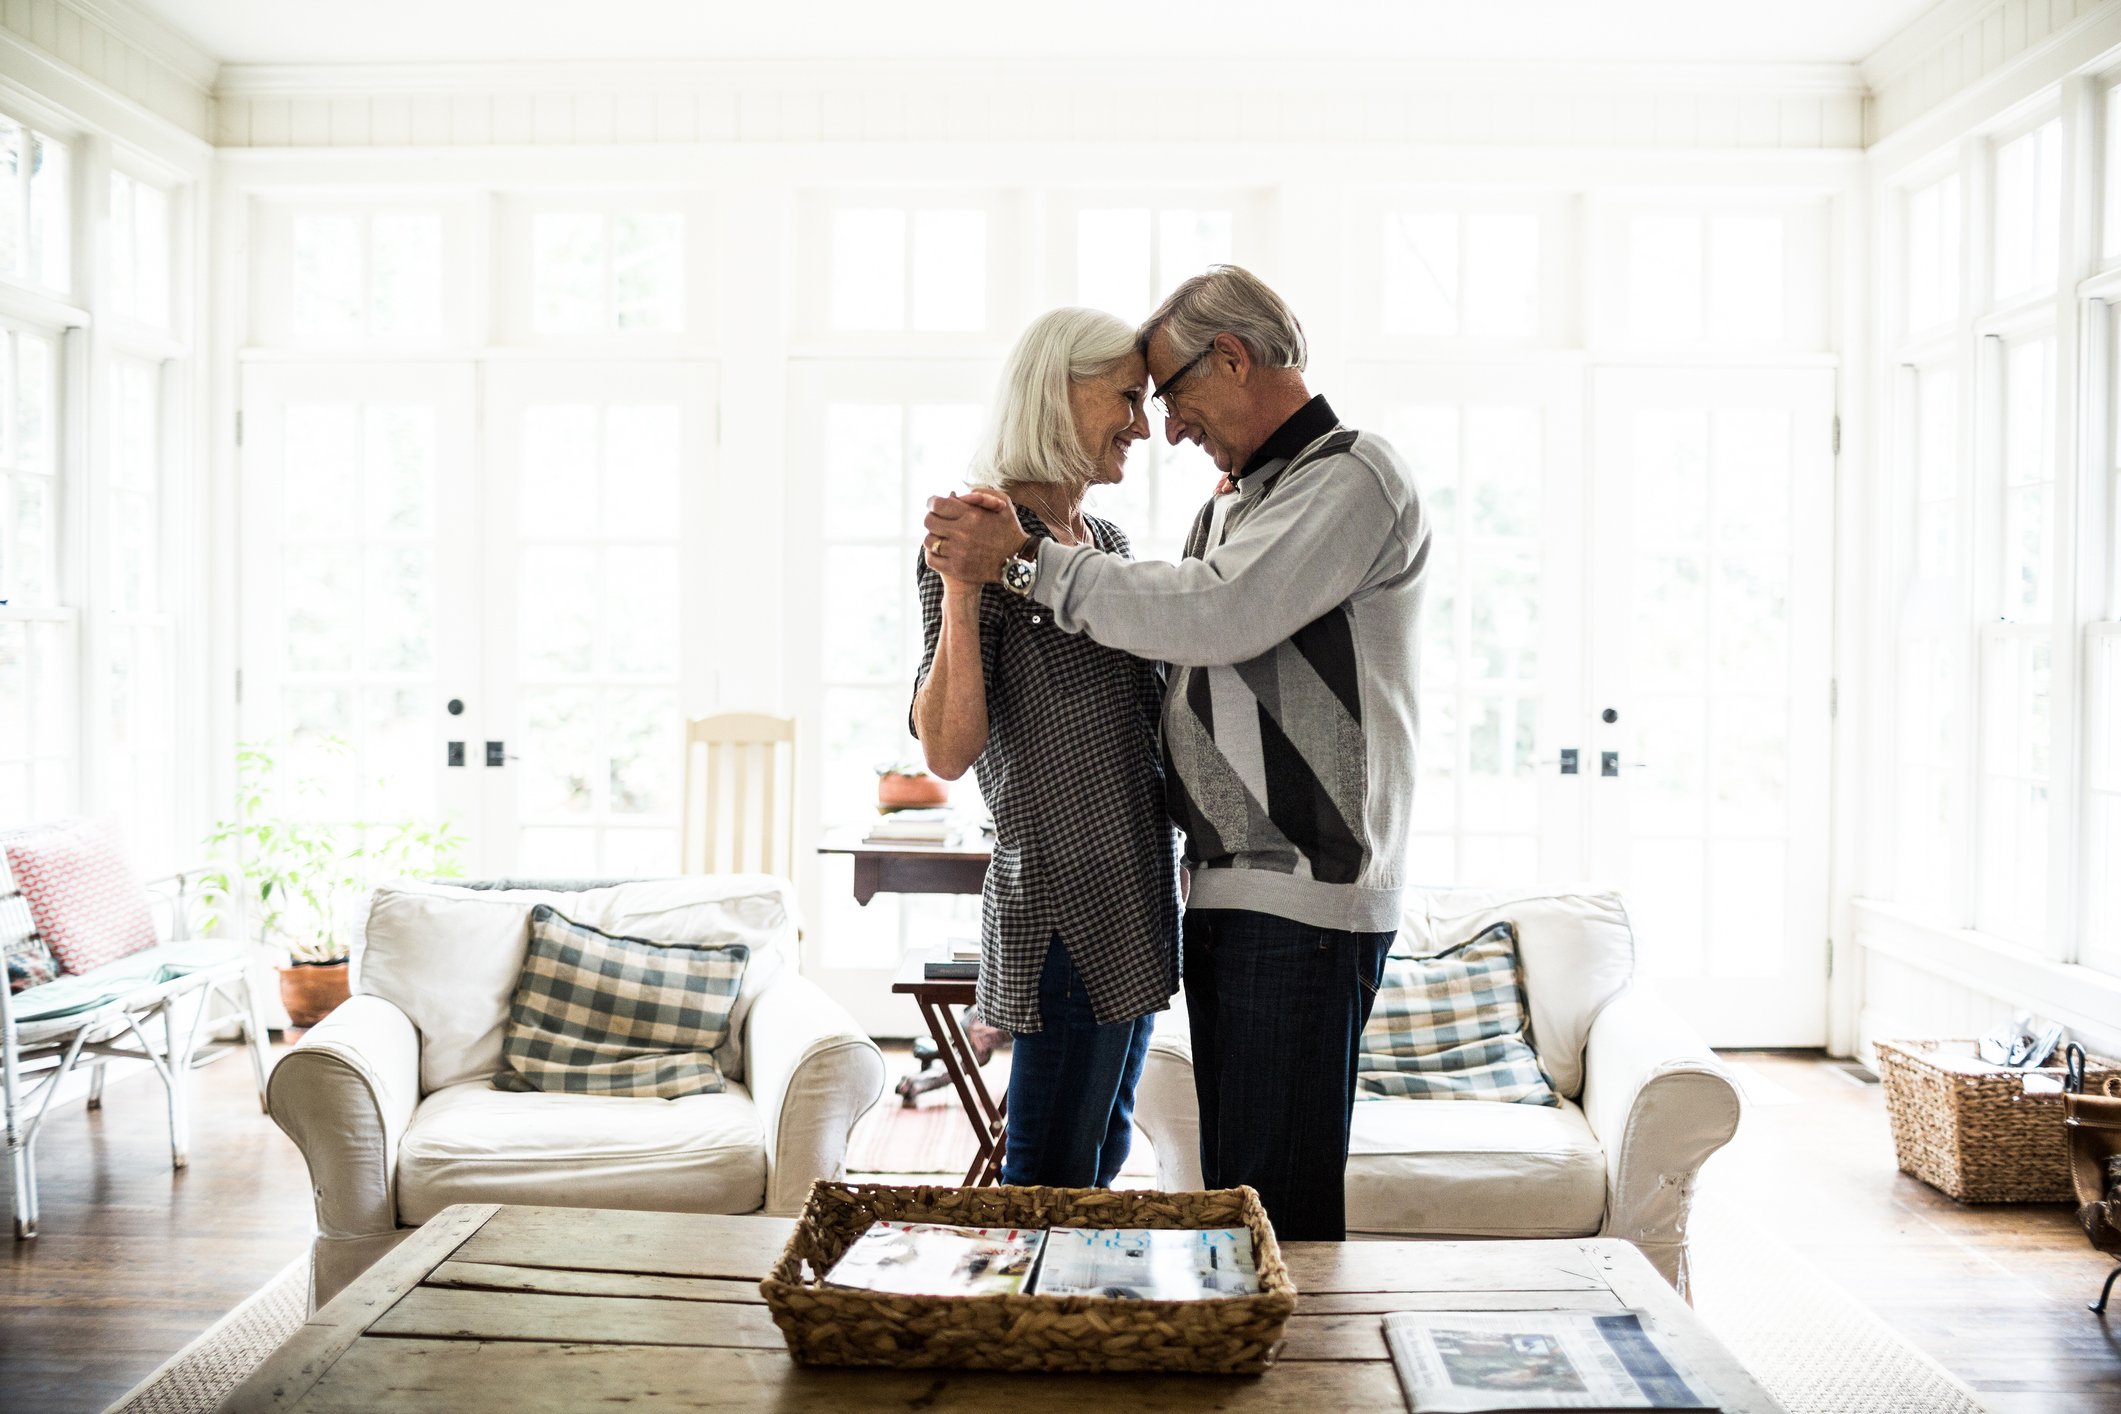 An image of an elderly couple dancing in the living room. | Photo: Getty Images